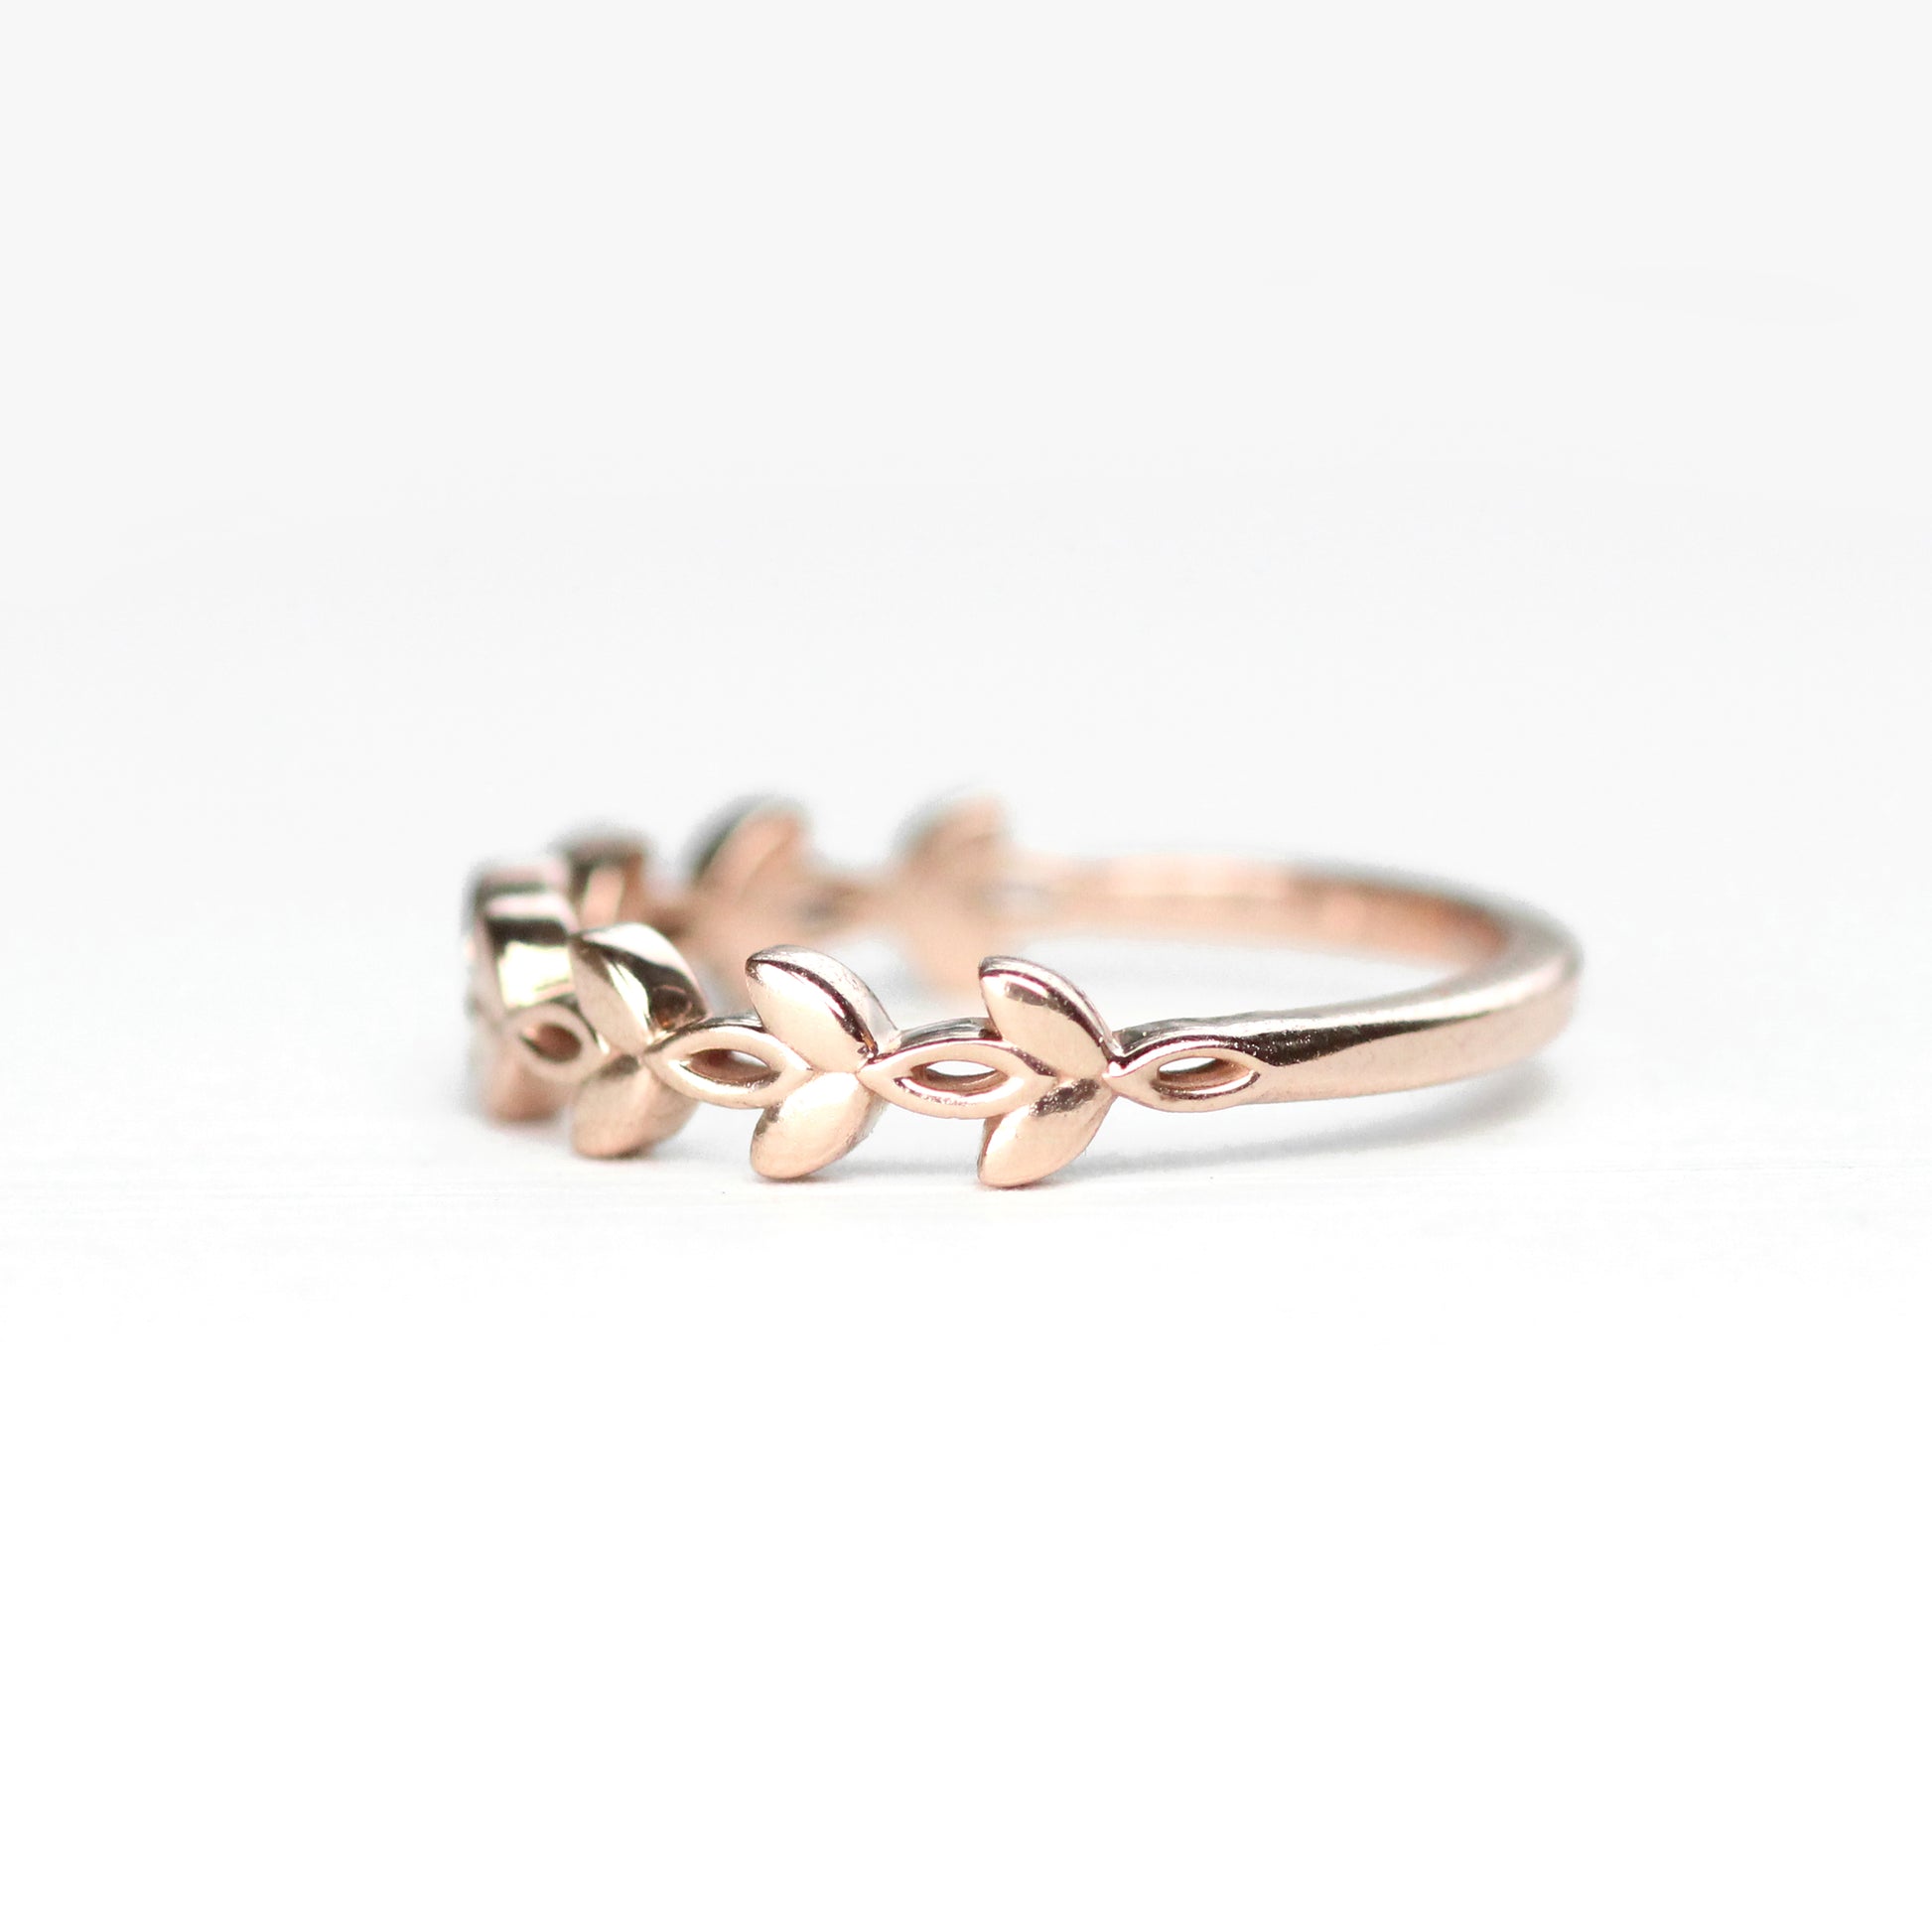 Willow - Wedding Stacking Band in Your Choice of 14K Gold - Midwinter Co. Alternative Bridal Rings and Modern Fine Jewelry